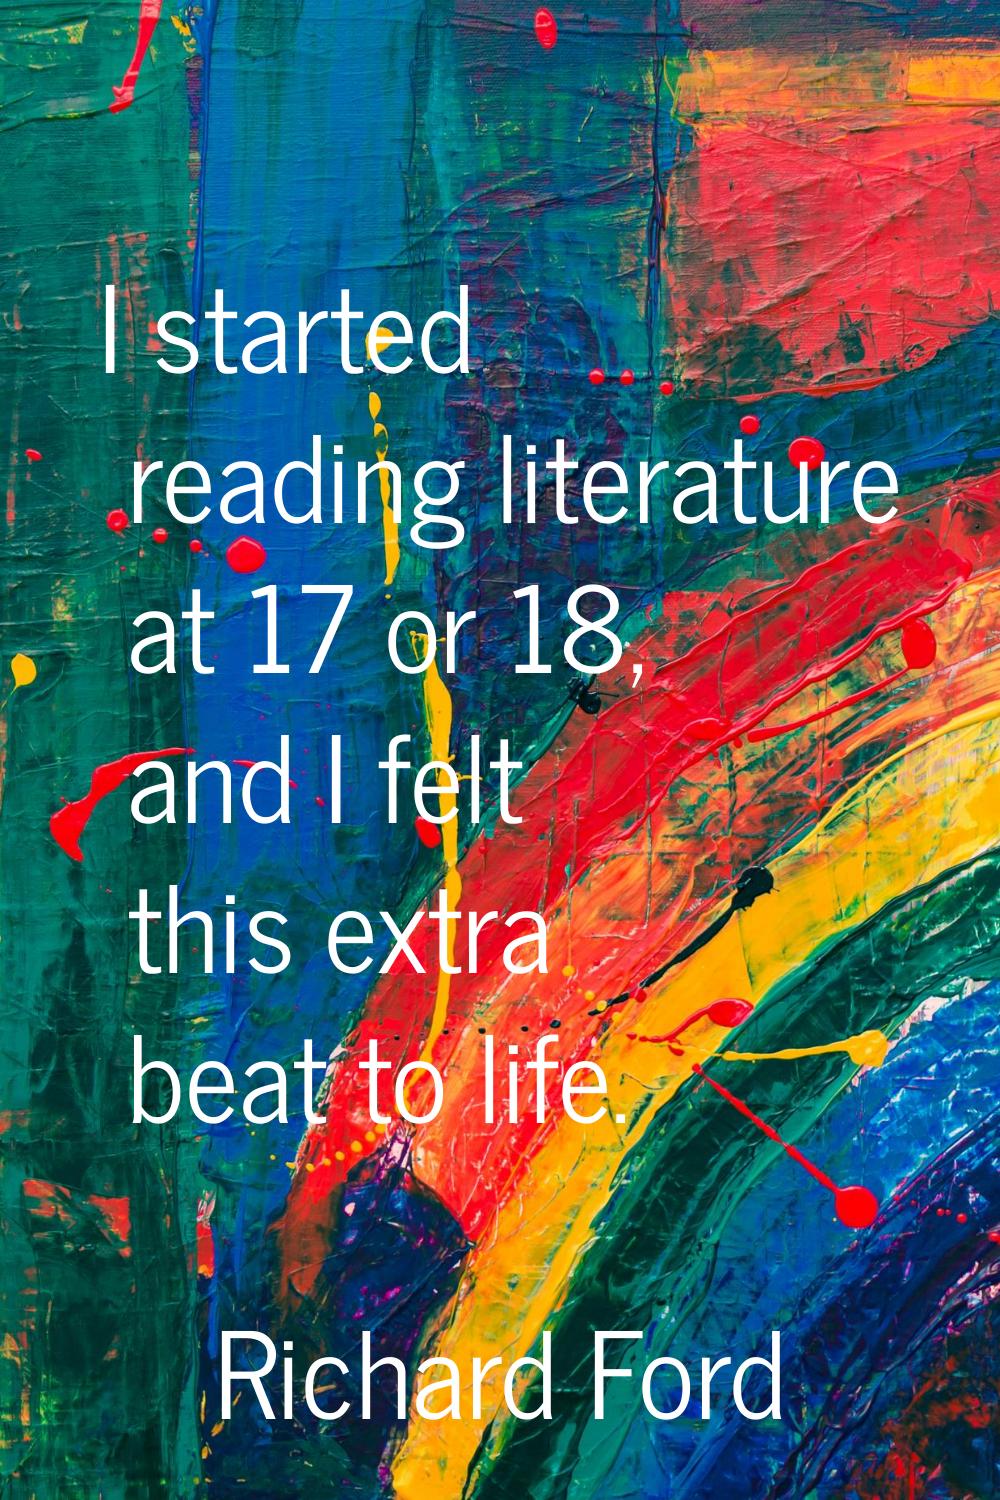 I started reading literature at 17 or 18, and I felt this extra beat to life.